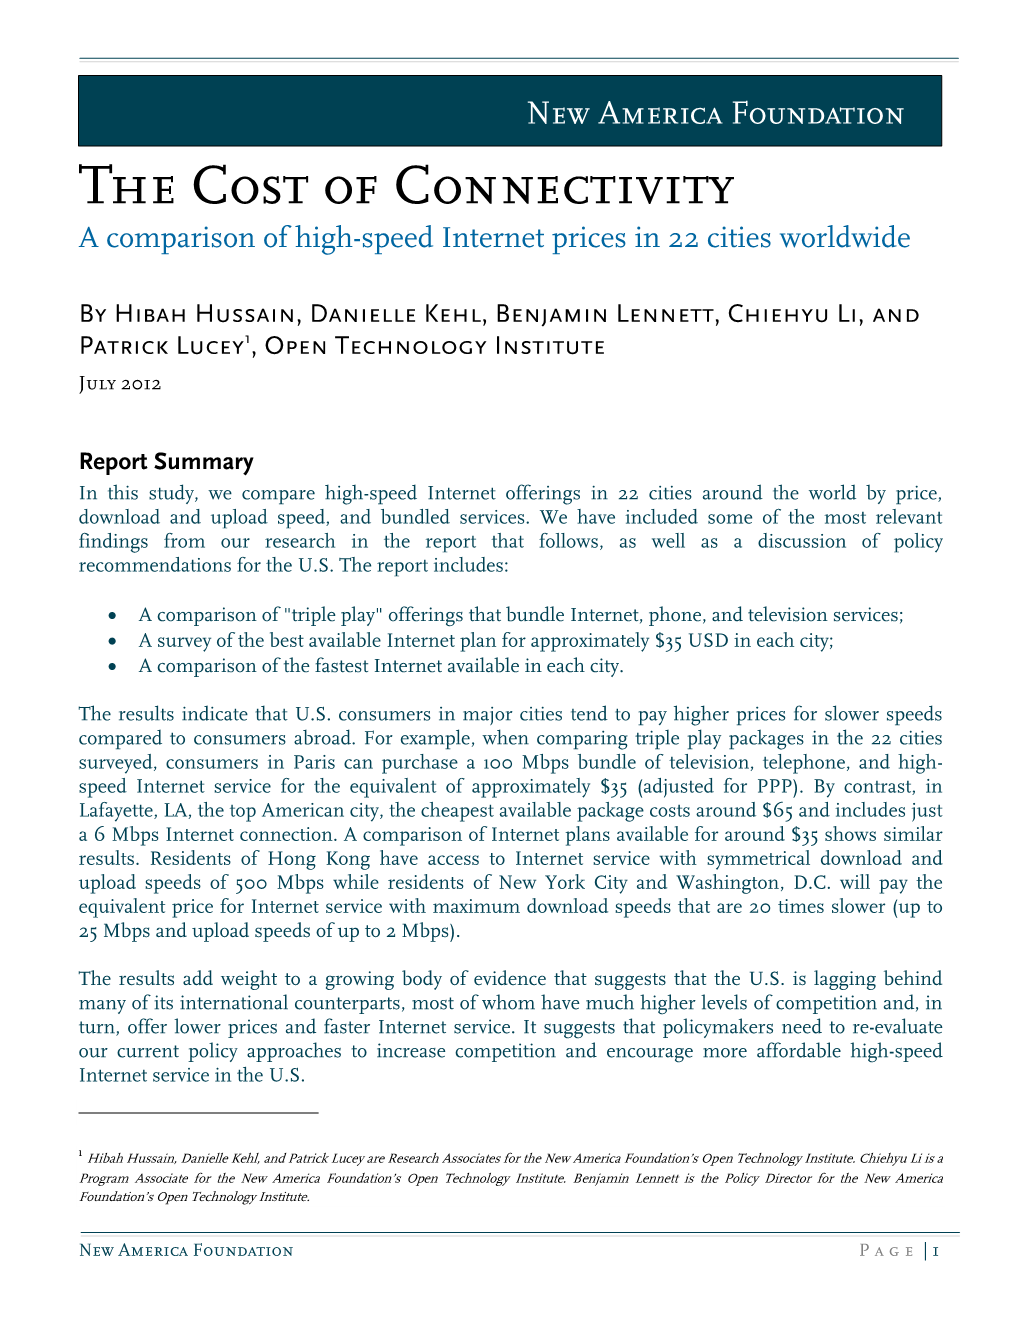 The Cost of Connectivity a Comparison of High-Speed Internet Prices in 22 Cities Worldwide